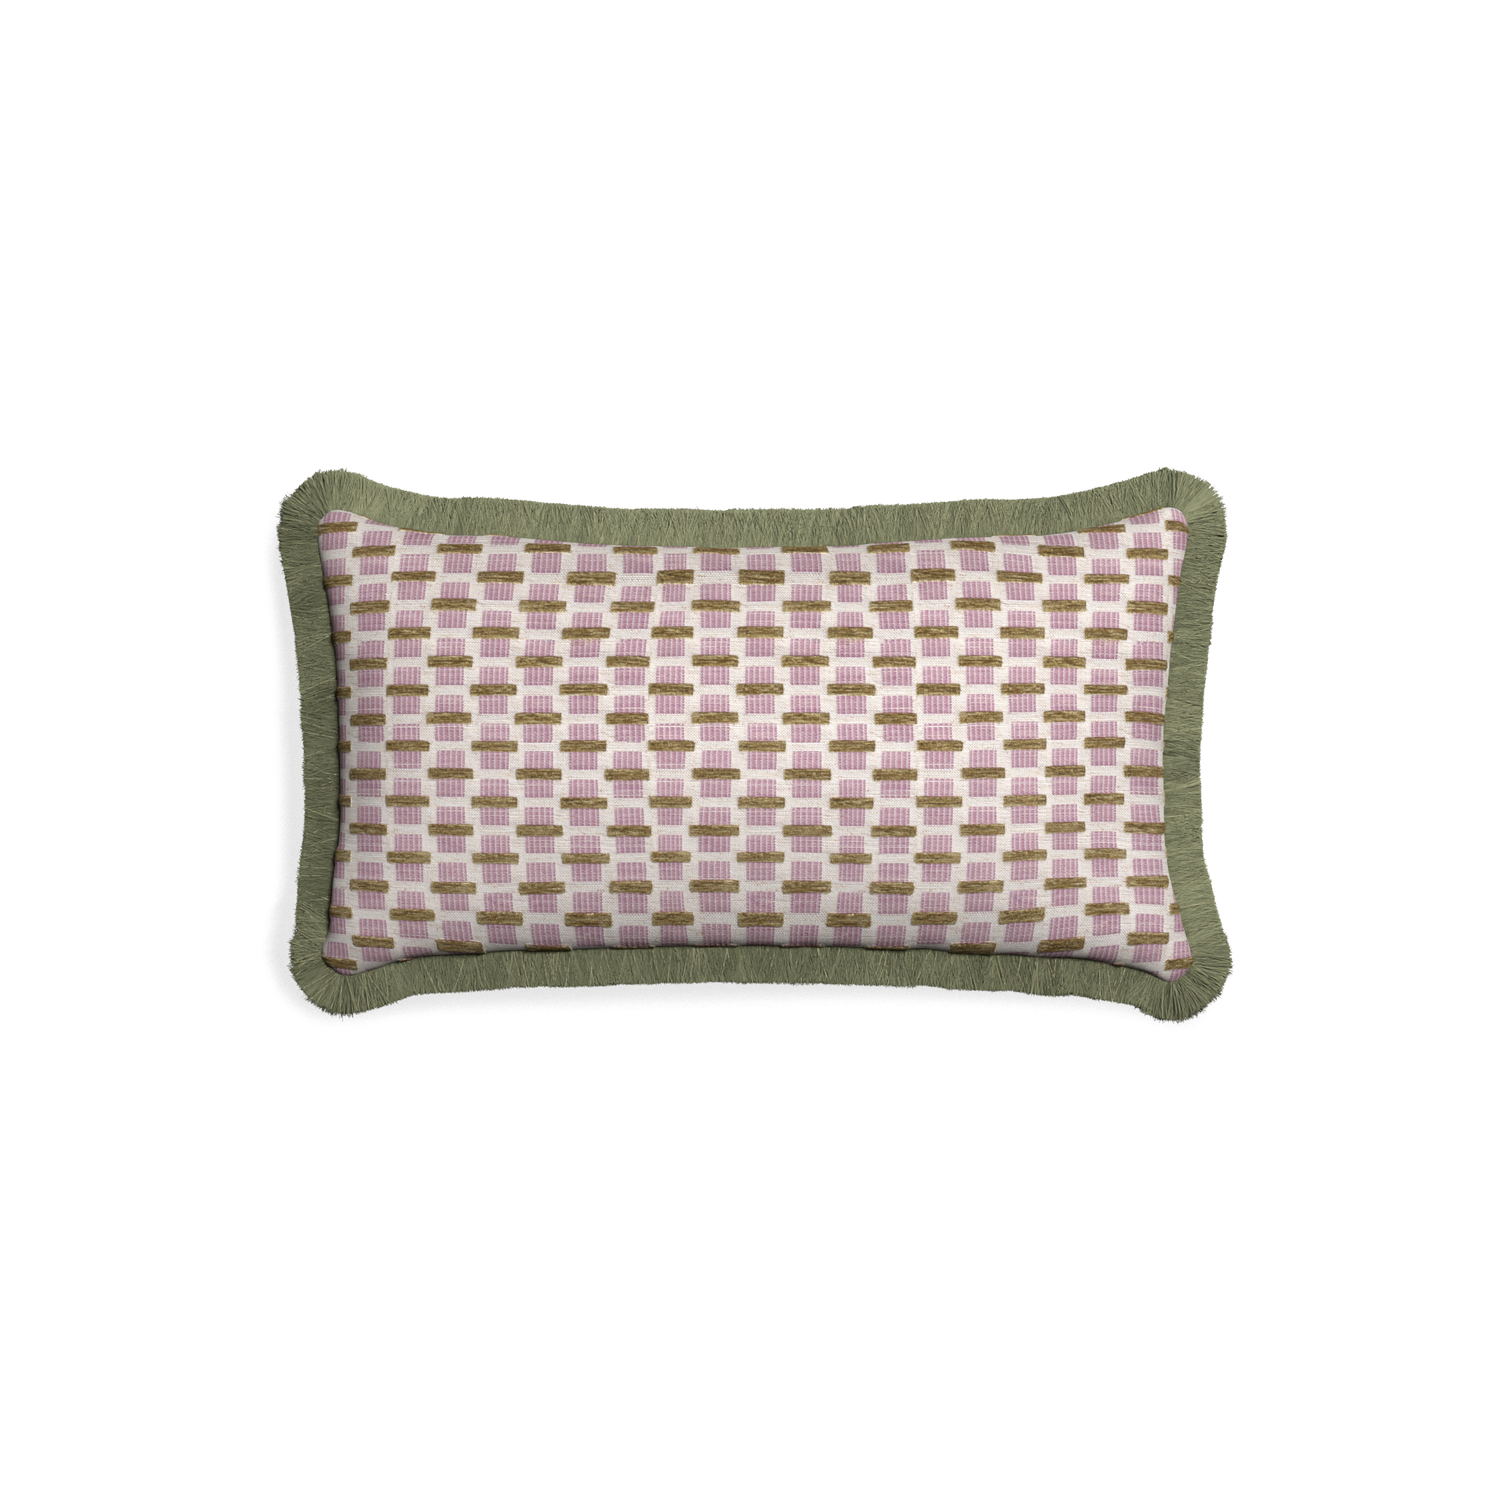 Petite-lumbar willow orchid custom pink geometric chenillepillow with sage fringe on white background